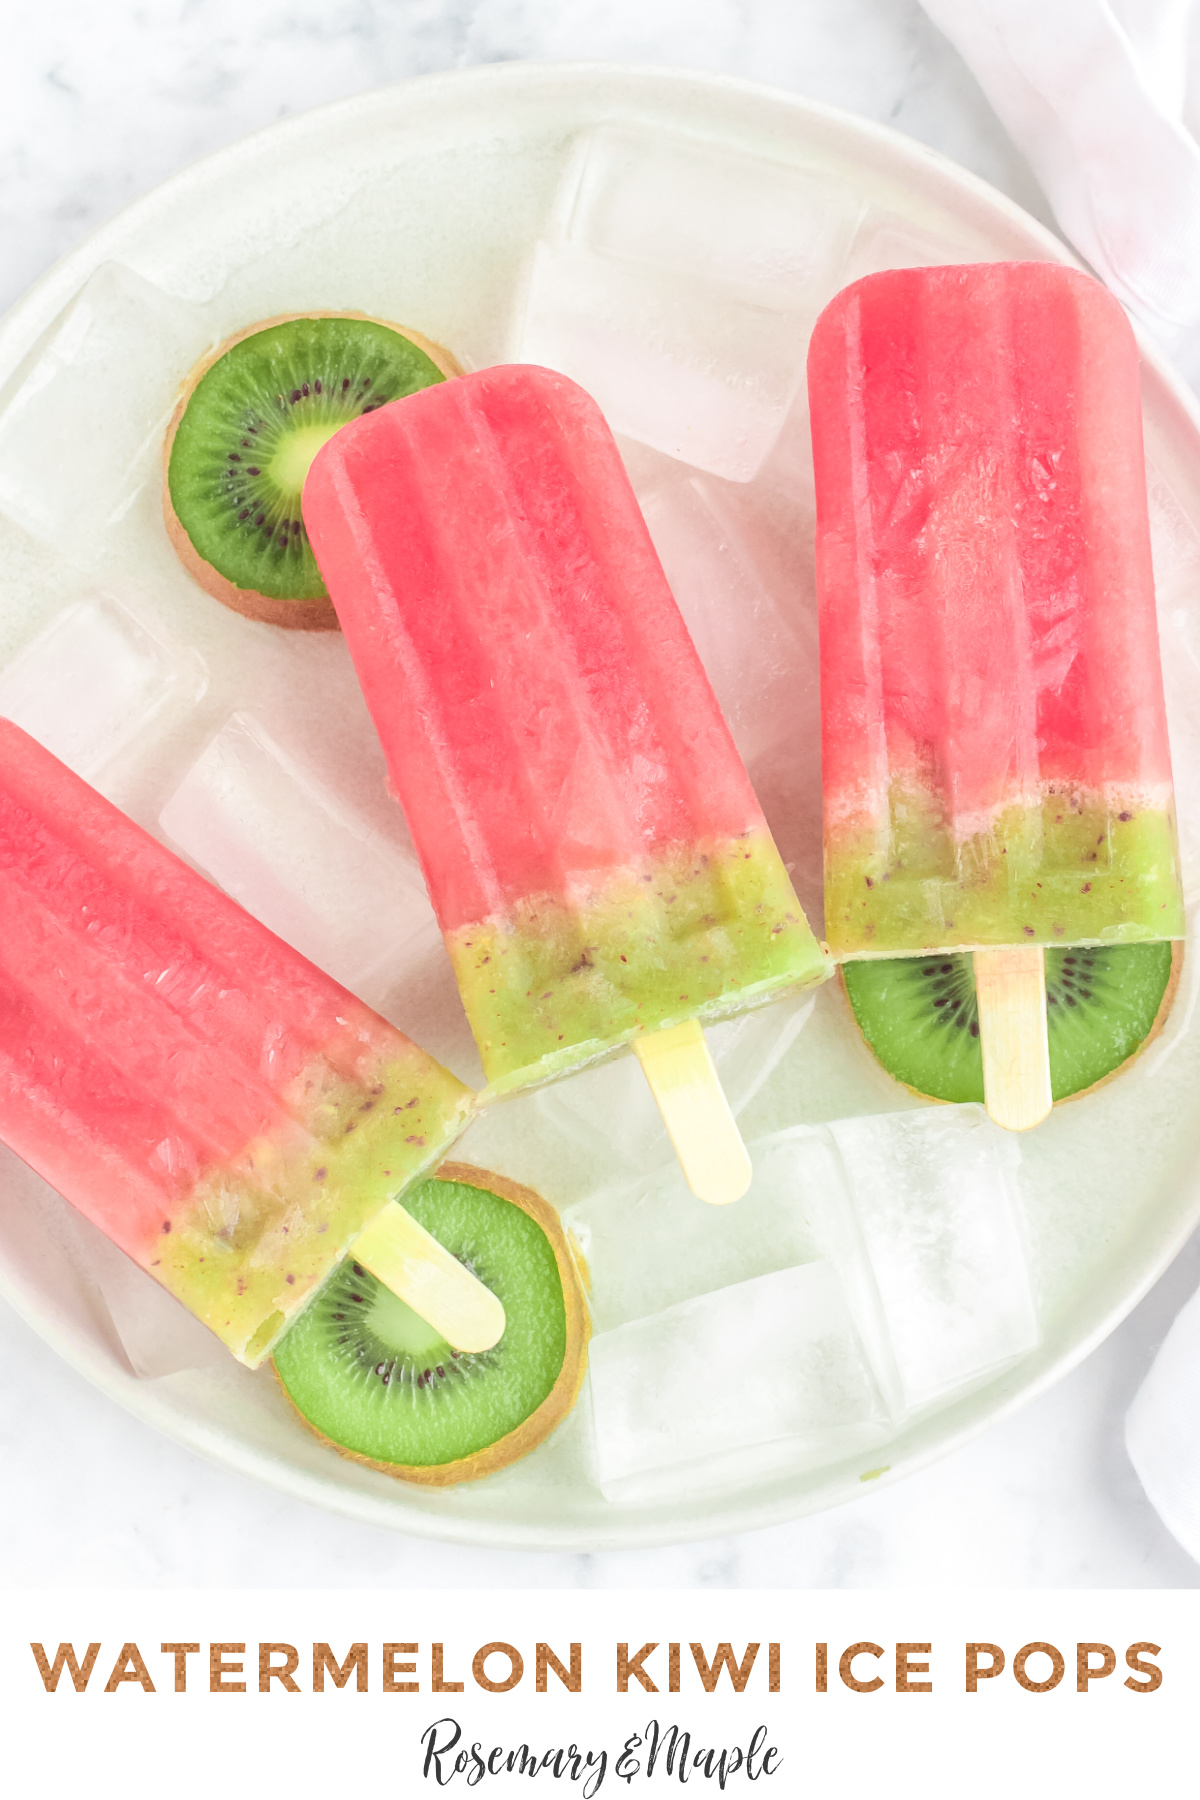 These watermelon kiwi ice pops are healthy, refreshing and easy to make with only 3 ingredients. Perfect for hot summer days!